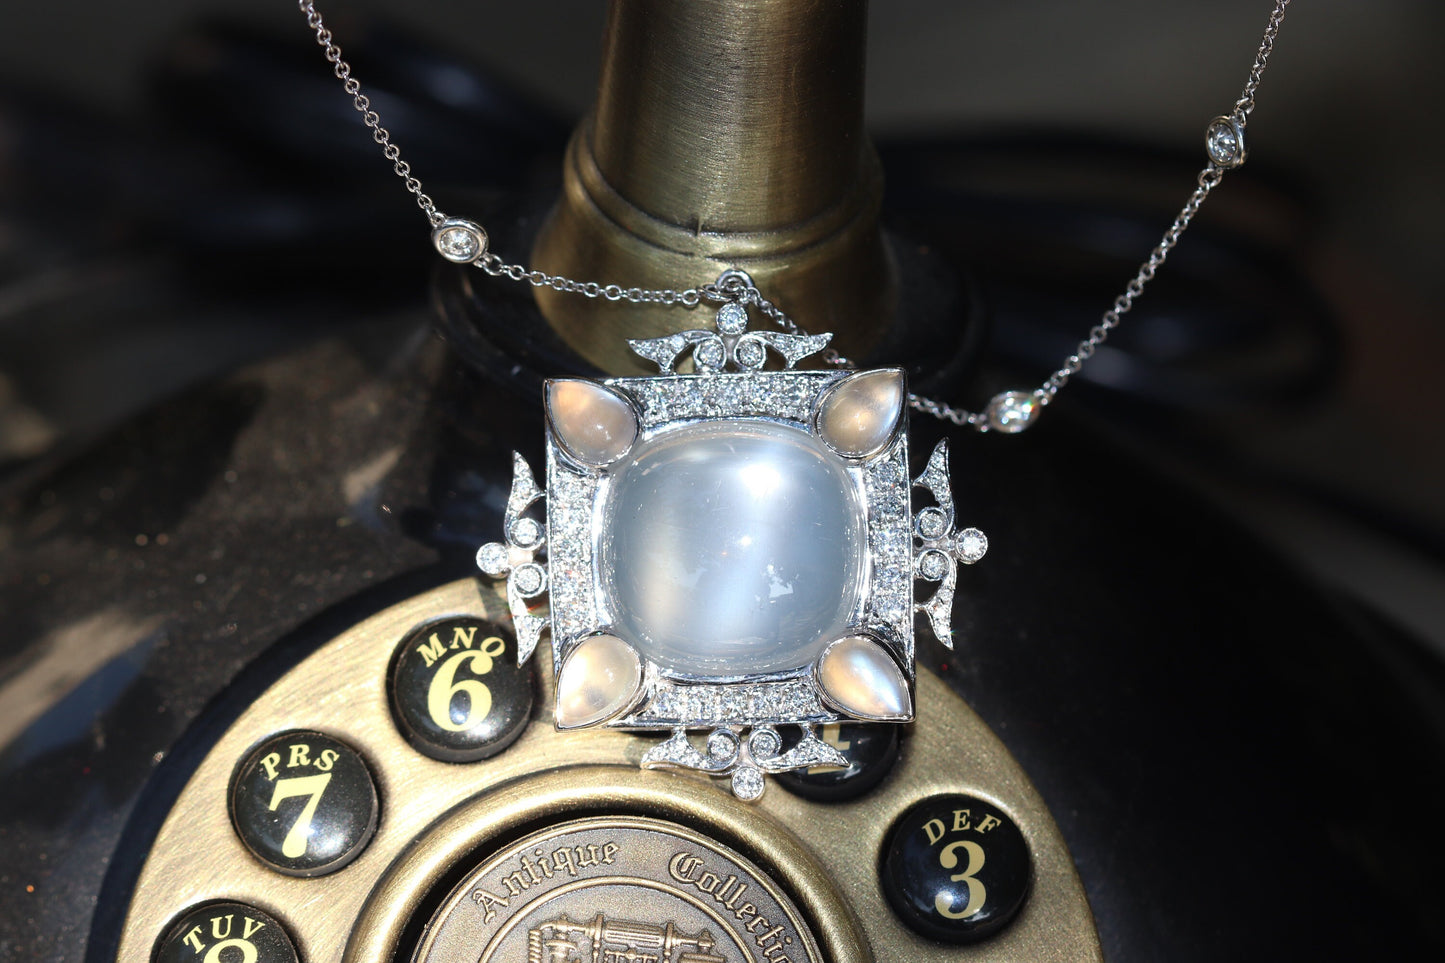 Cat’s eye moonstone and diamond pendant set in 18k gold includes a 17.5” diamonds by the yard chain in 14k gold